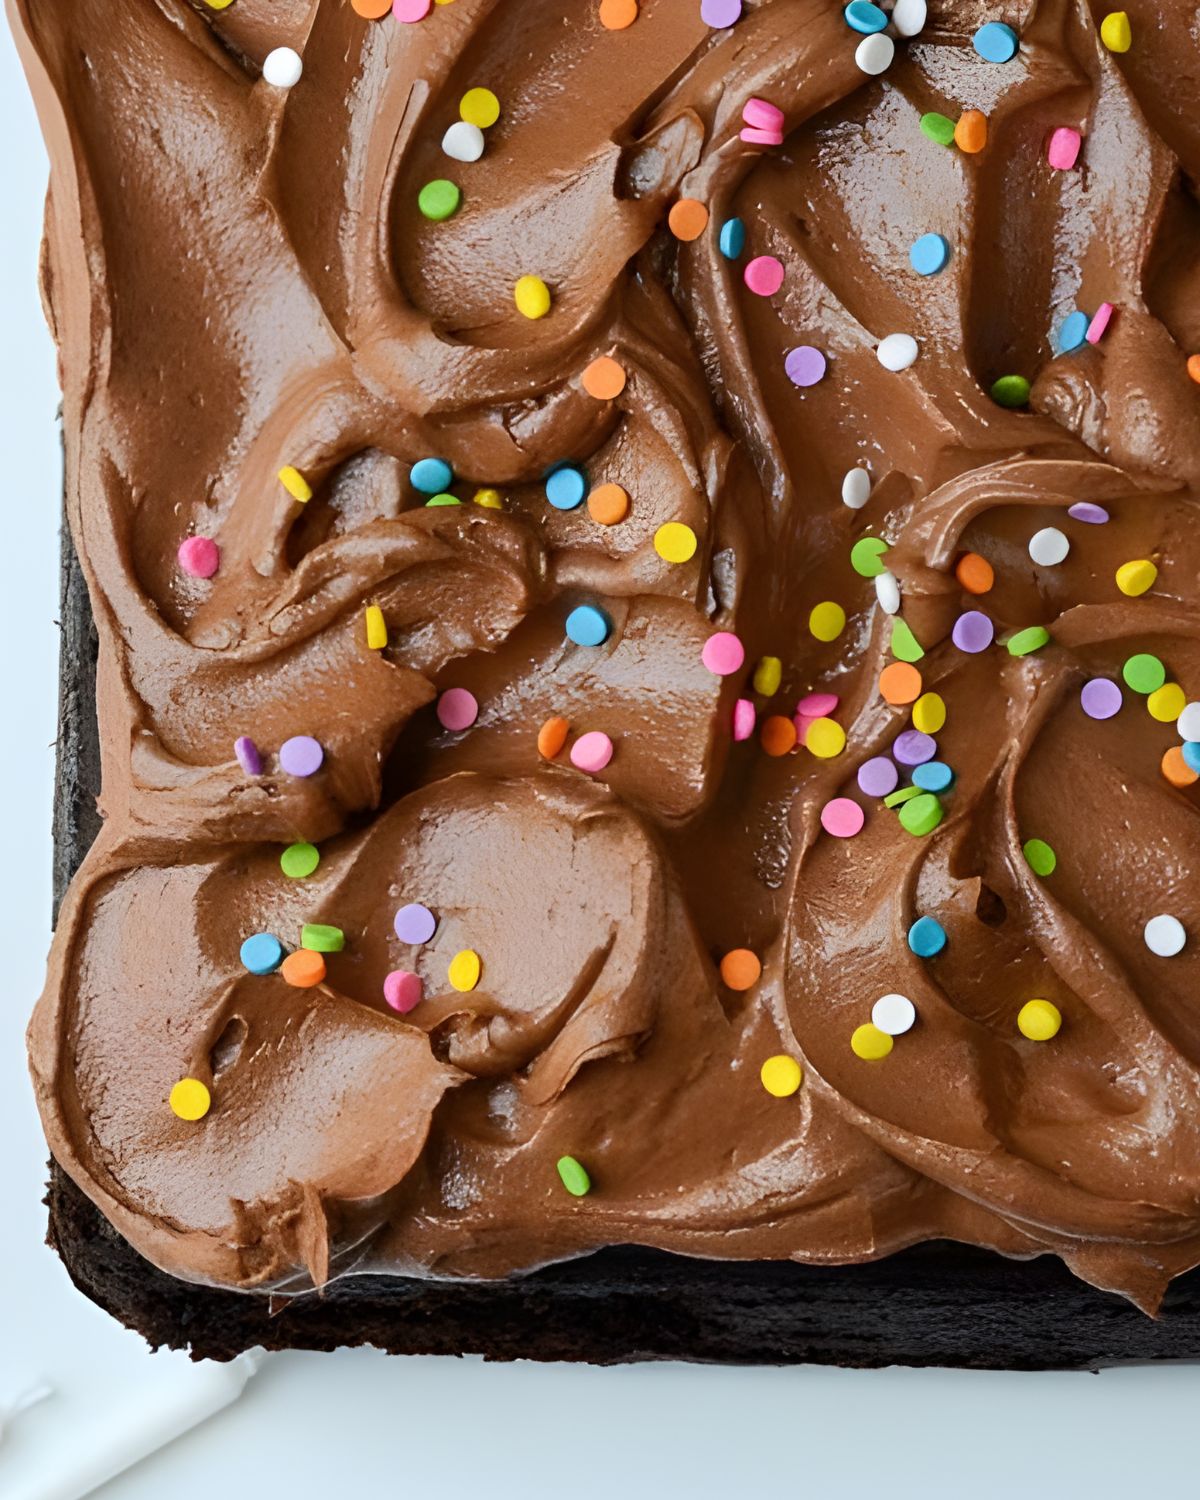 A single-layer chocolate cake with chocolate frosting.